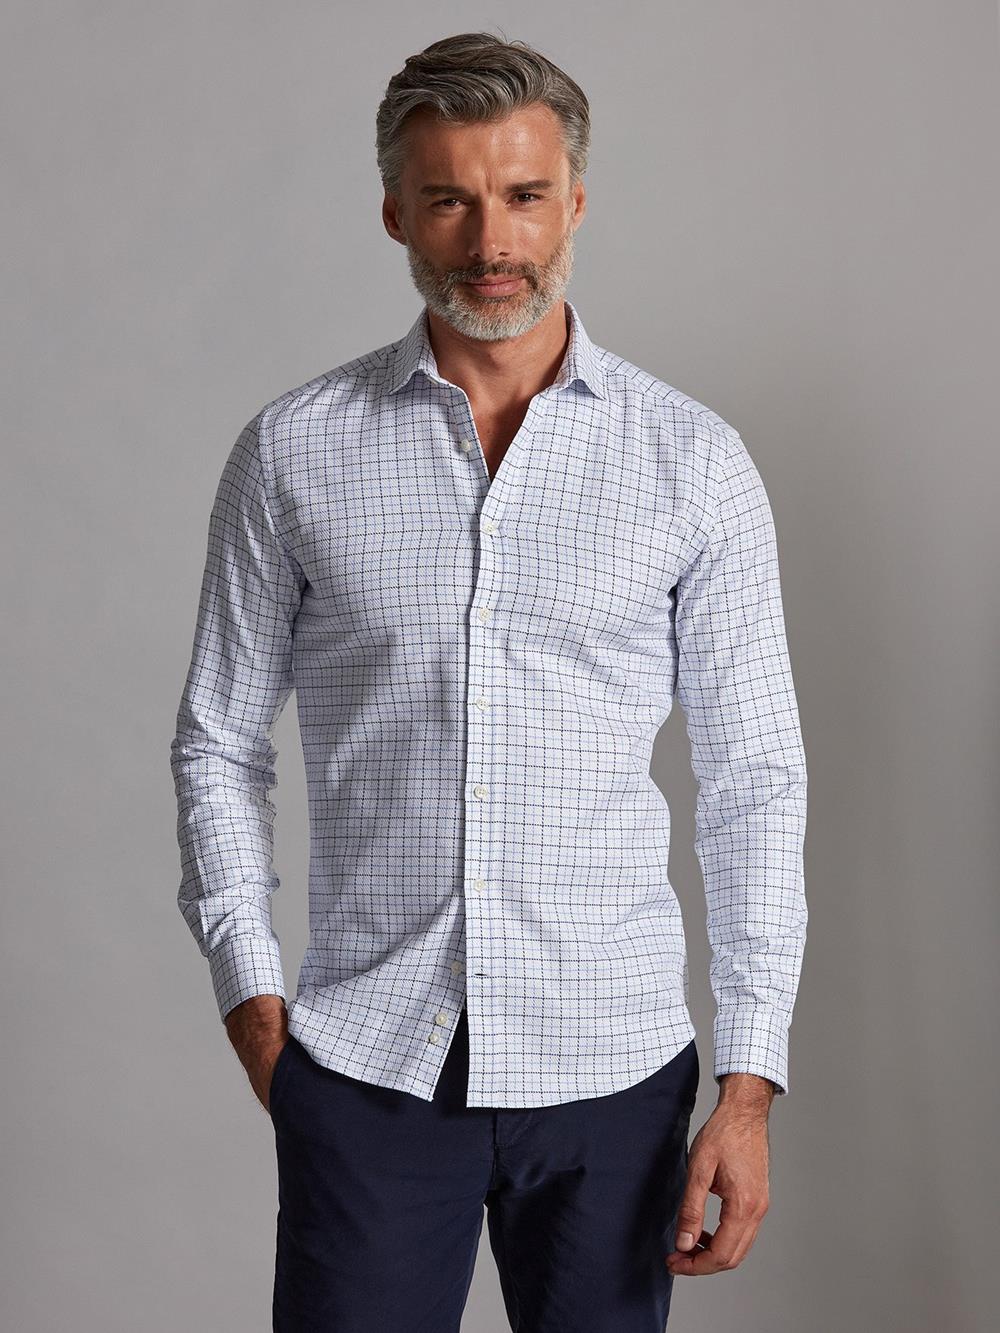 Sean navy blue checked slim fit shirt - Extra long sleeves